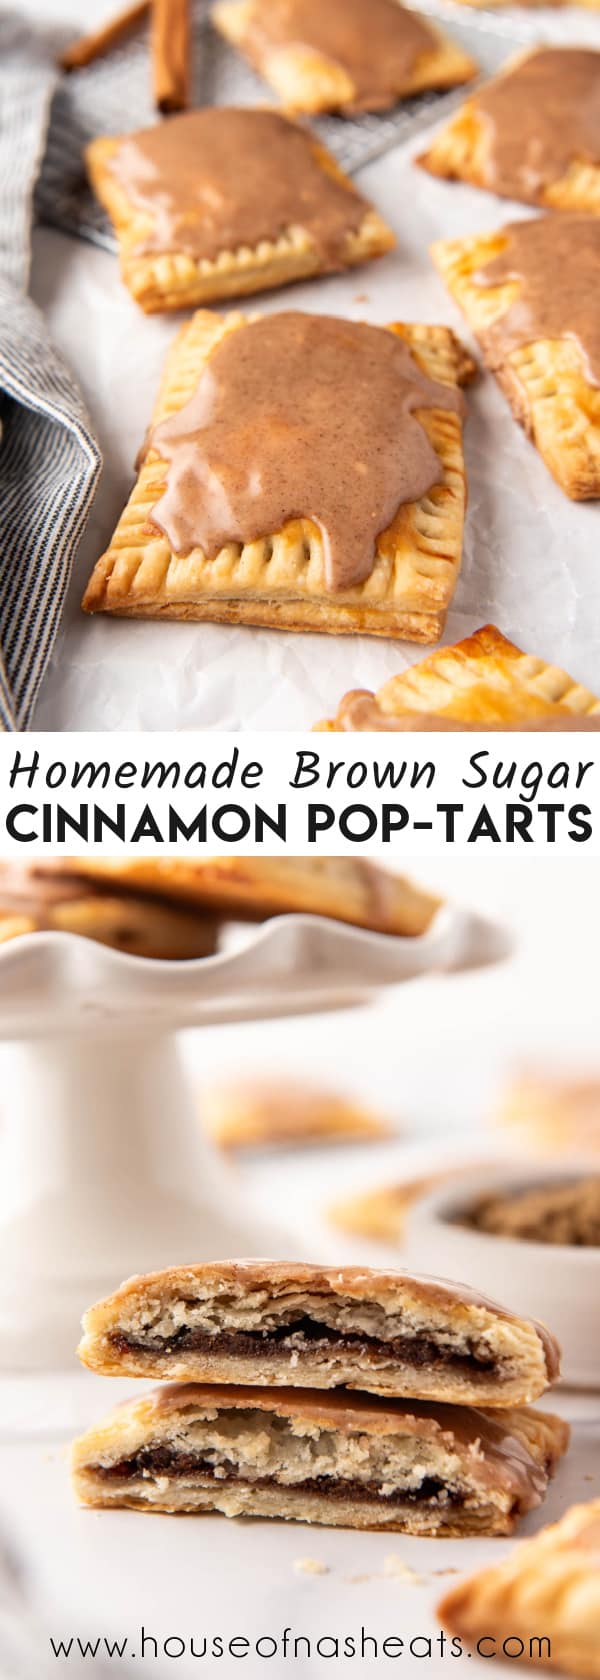 A collage of images of homemade brown sugar cinnamon pop-tarts with text overlay.